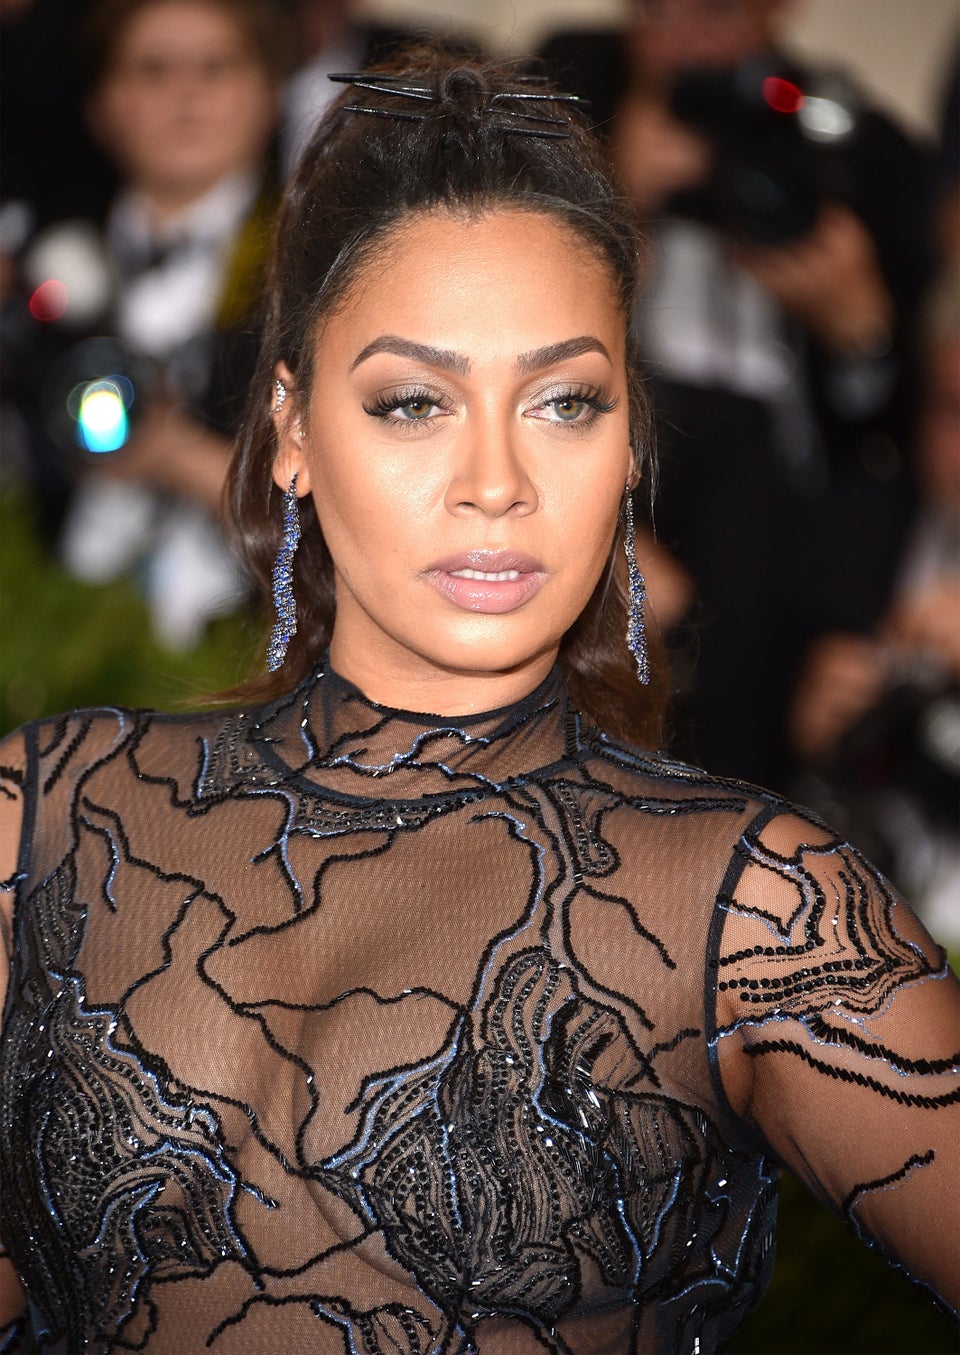 La La Anthony And Other Celebs Plead For Puerto Rico Relief